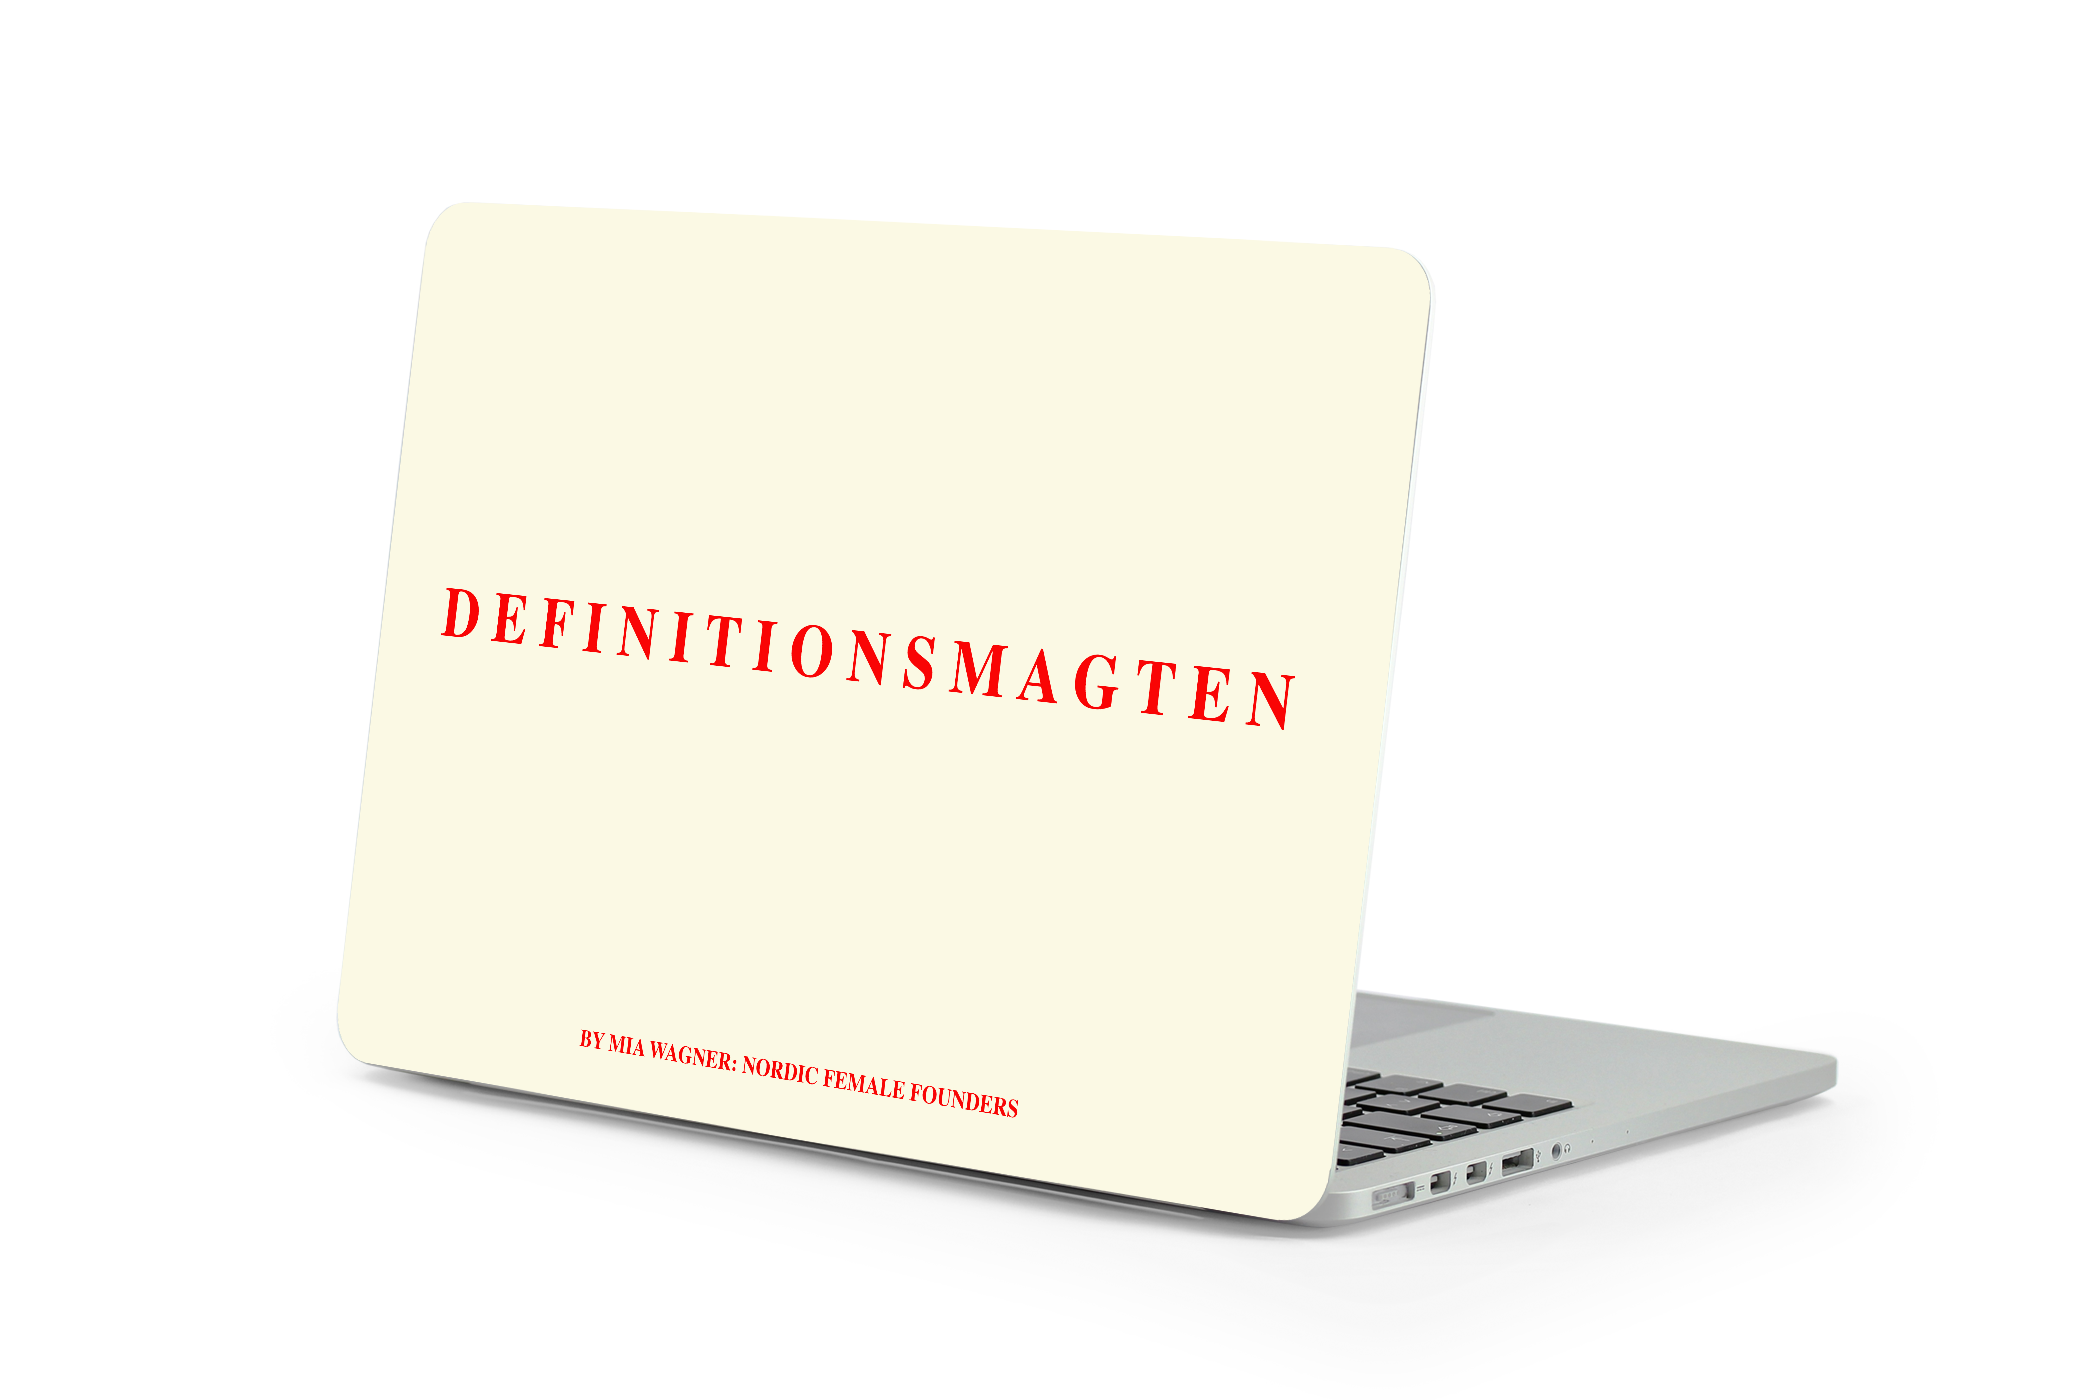 DEFINITIONSMAGTEN by Mia Wagner